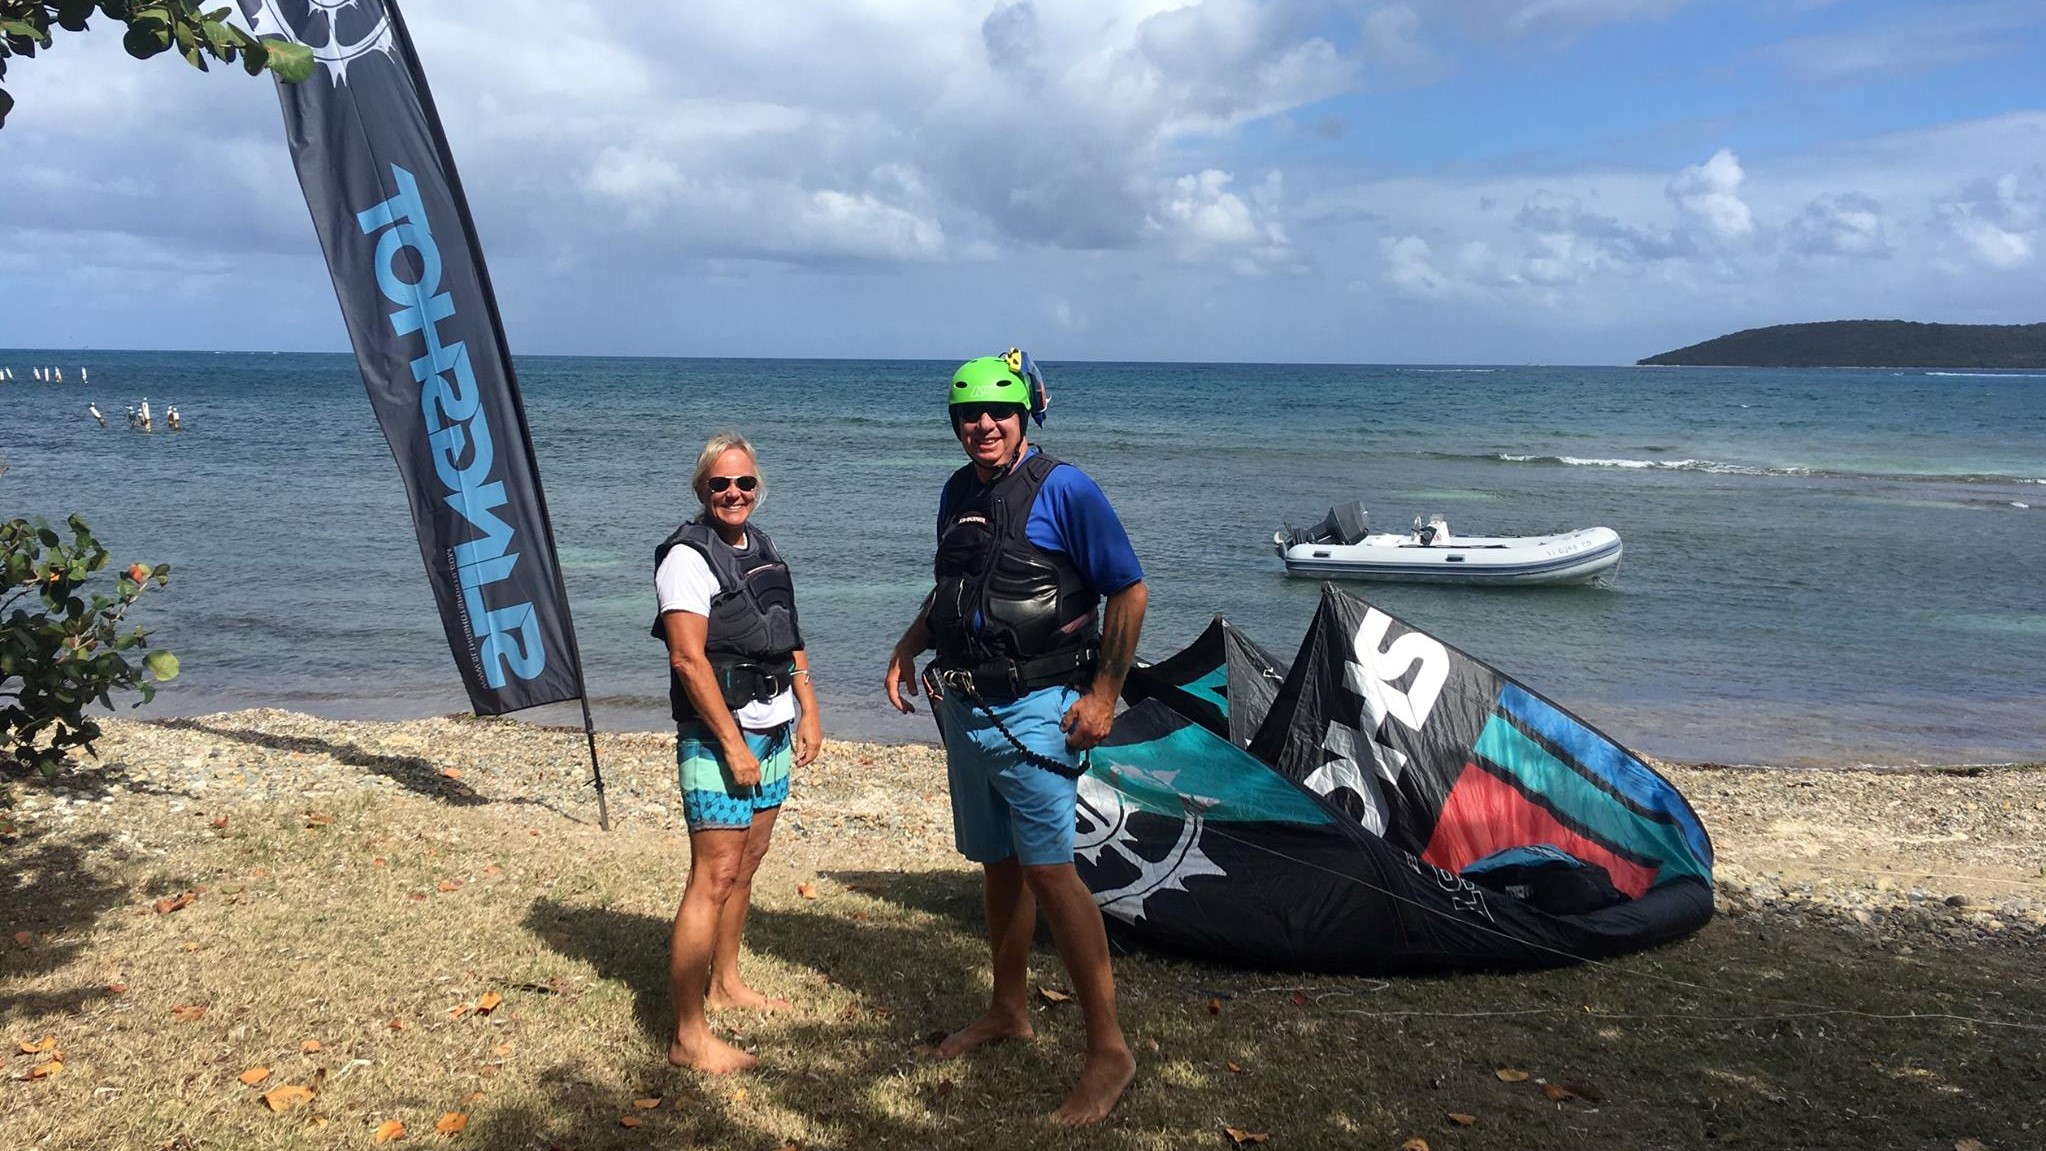 Husband and wife on the beach at kite st croix after a great kitesurfing lesson.